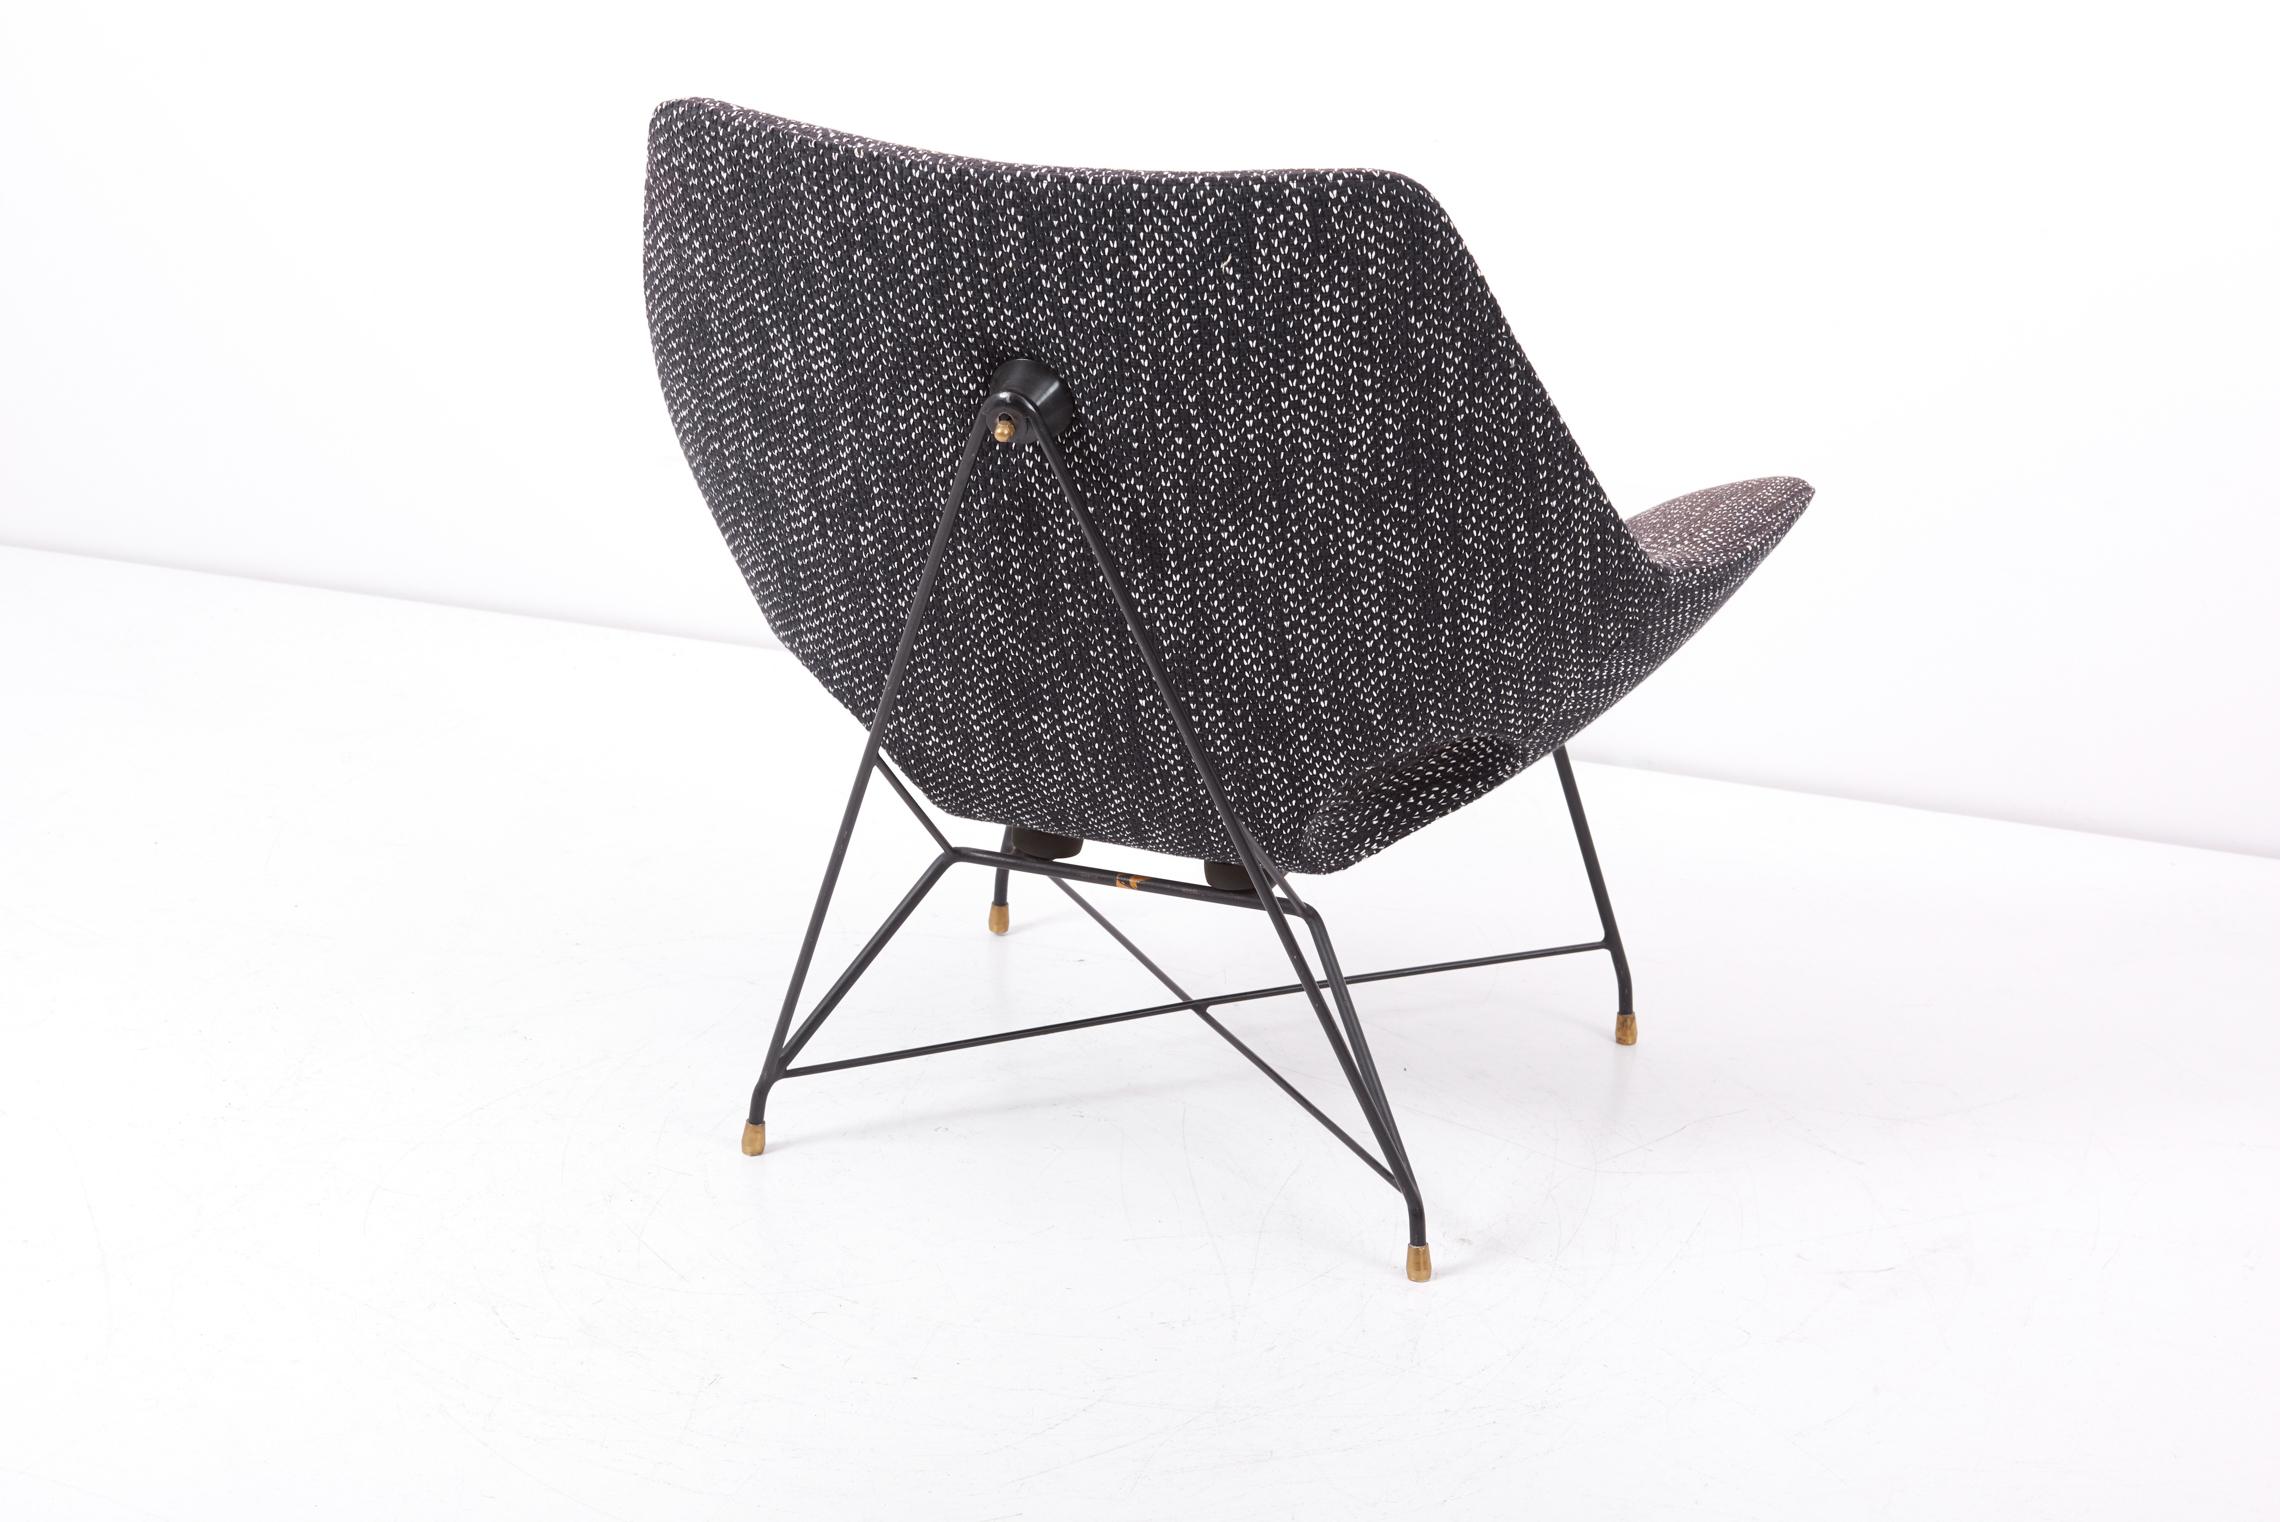 Lounge Chair by Augusto Bozzi for Saporiti in black & white fabric, Italy, 1950s For Sale 1